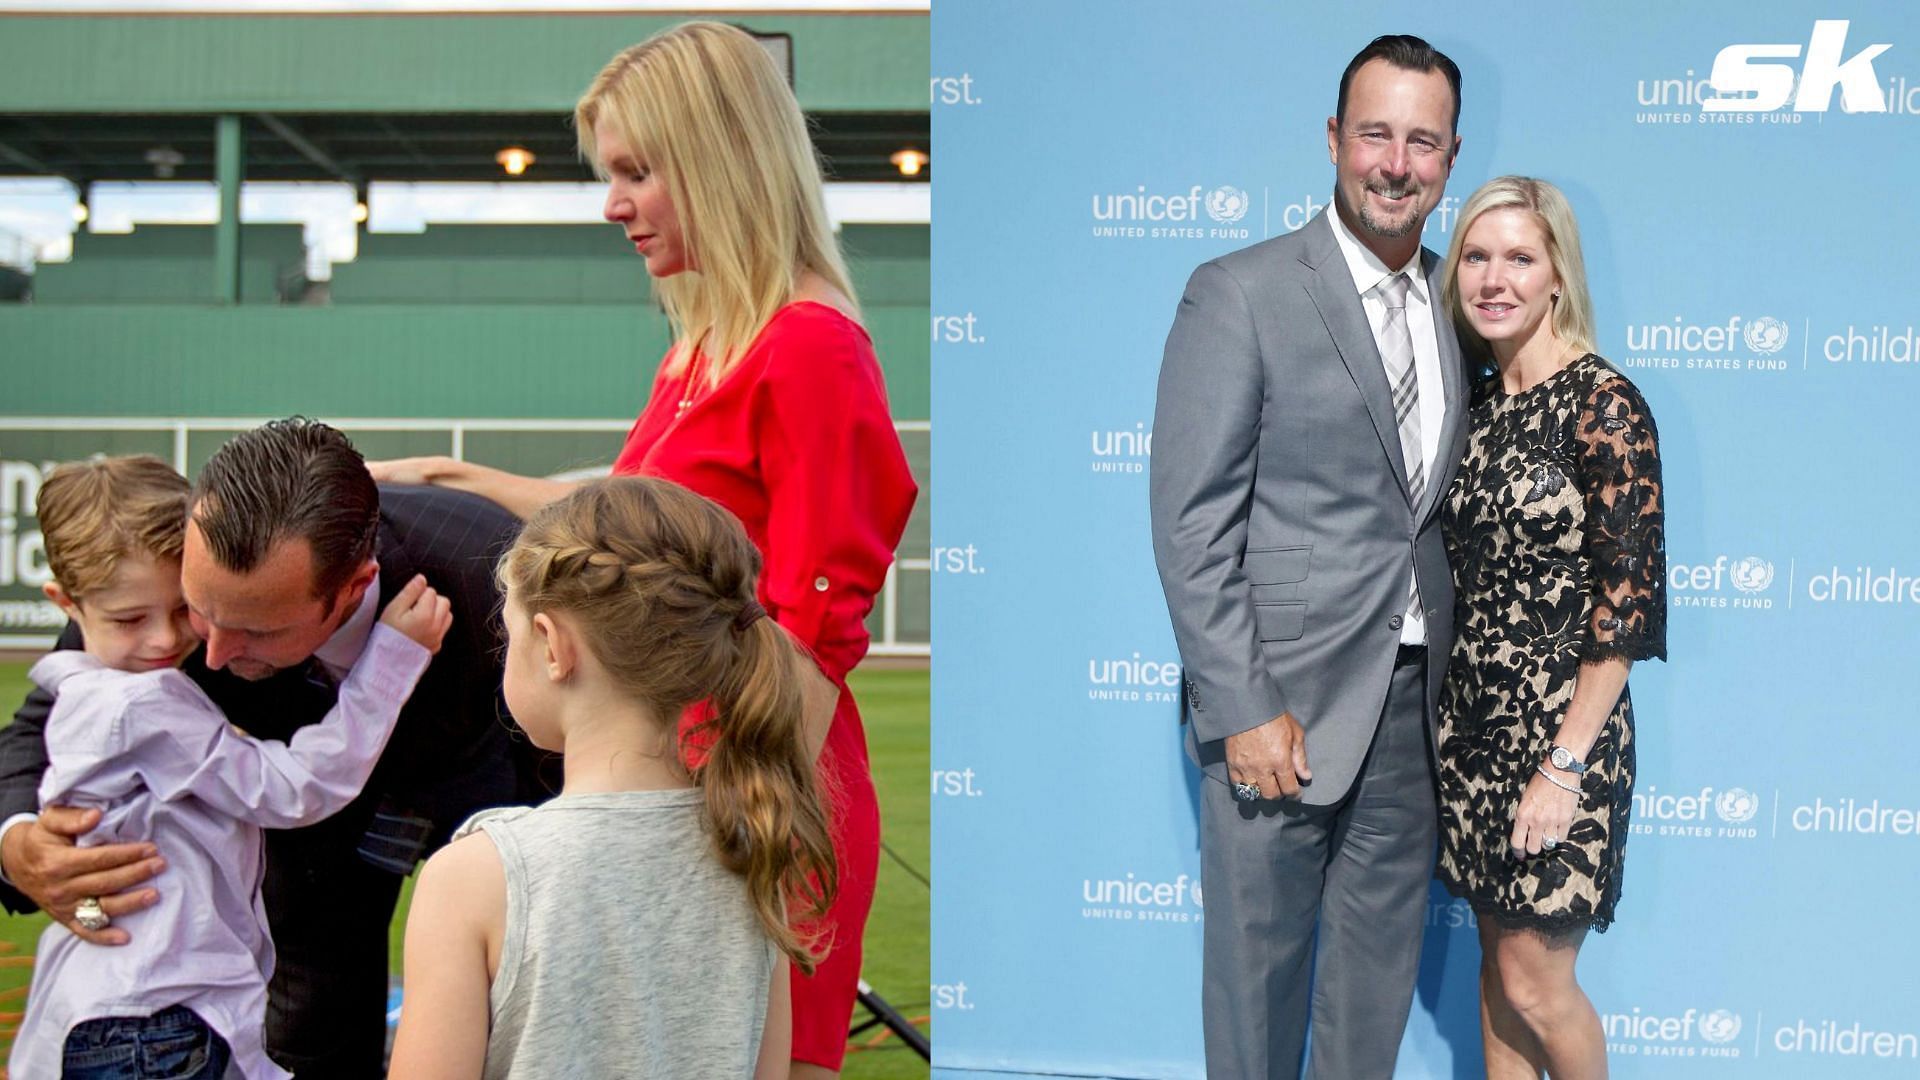 The MLB community mourns the passing of Stacy Wakefield, wife of late Red Sox pitcher Tim Wakefield